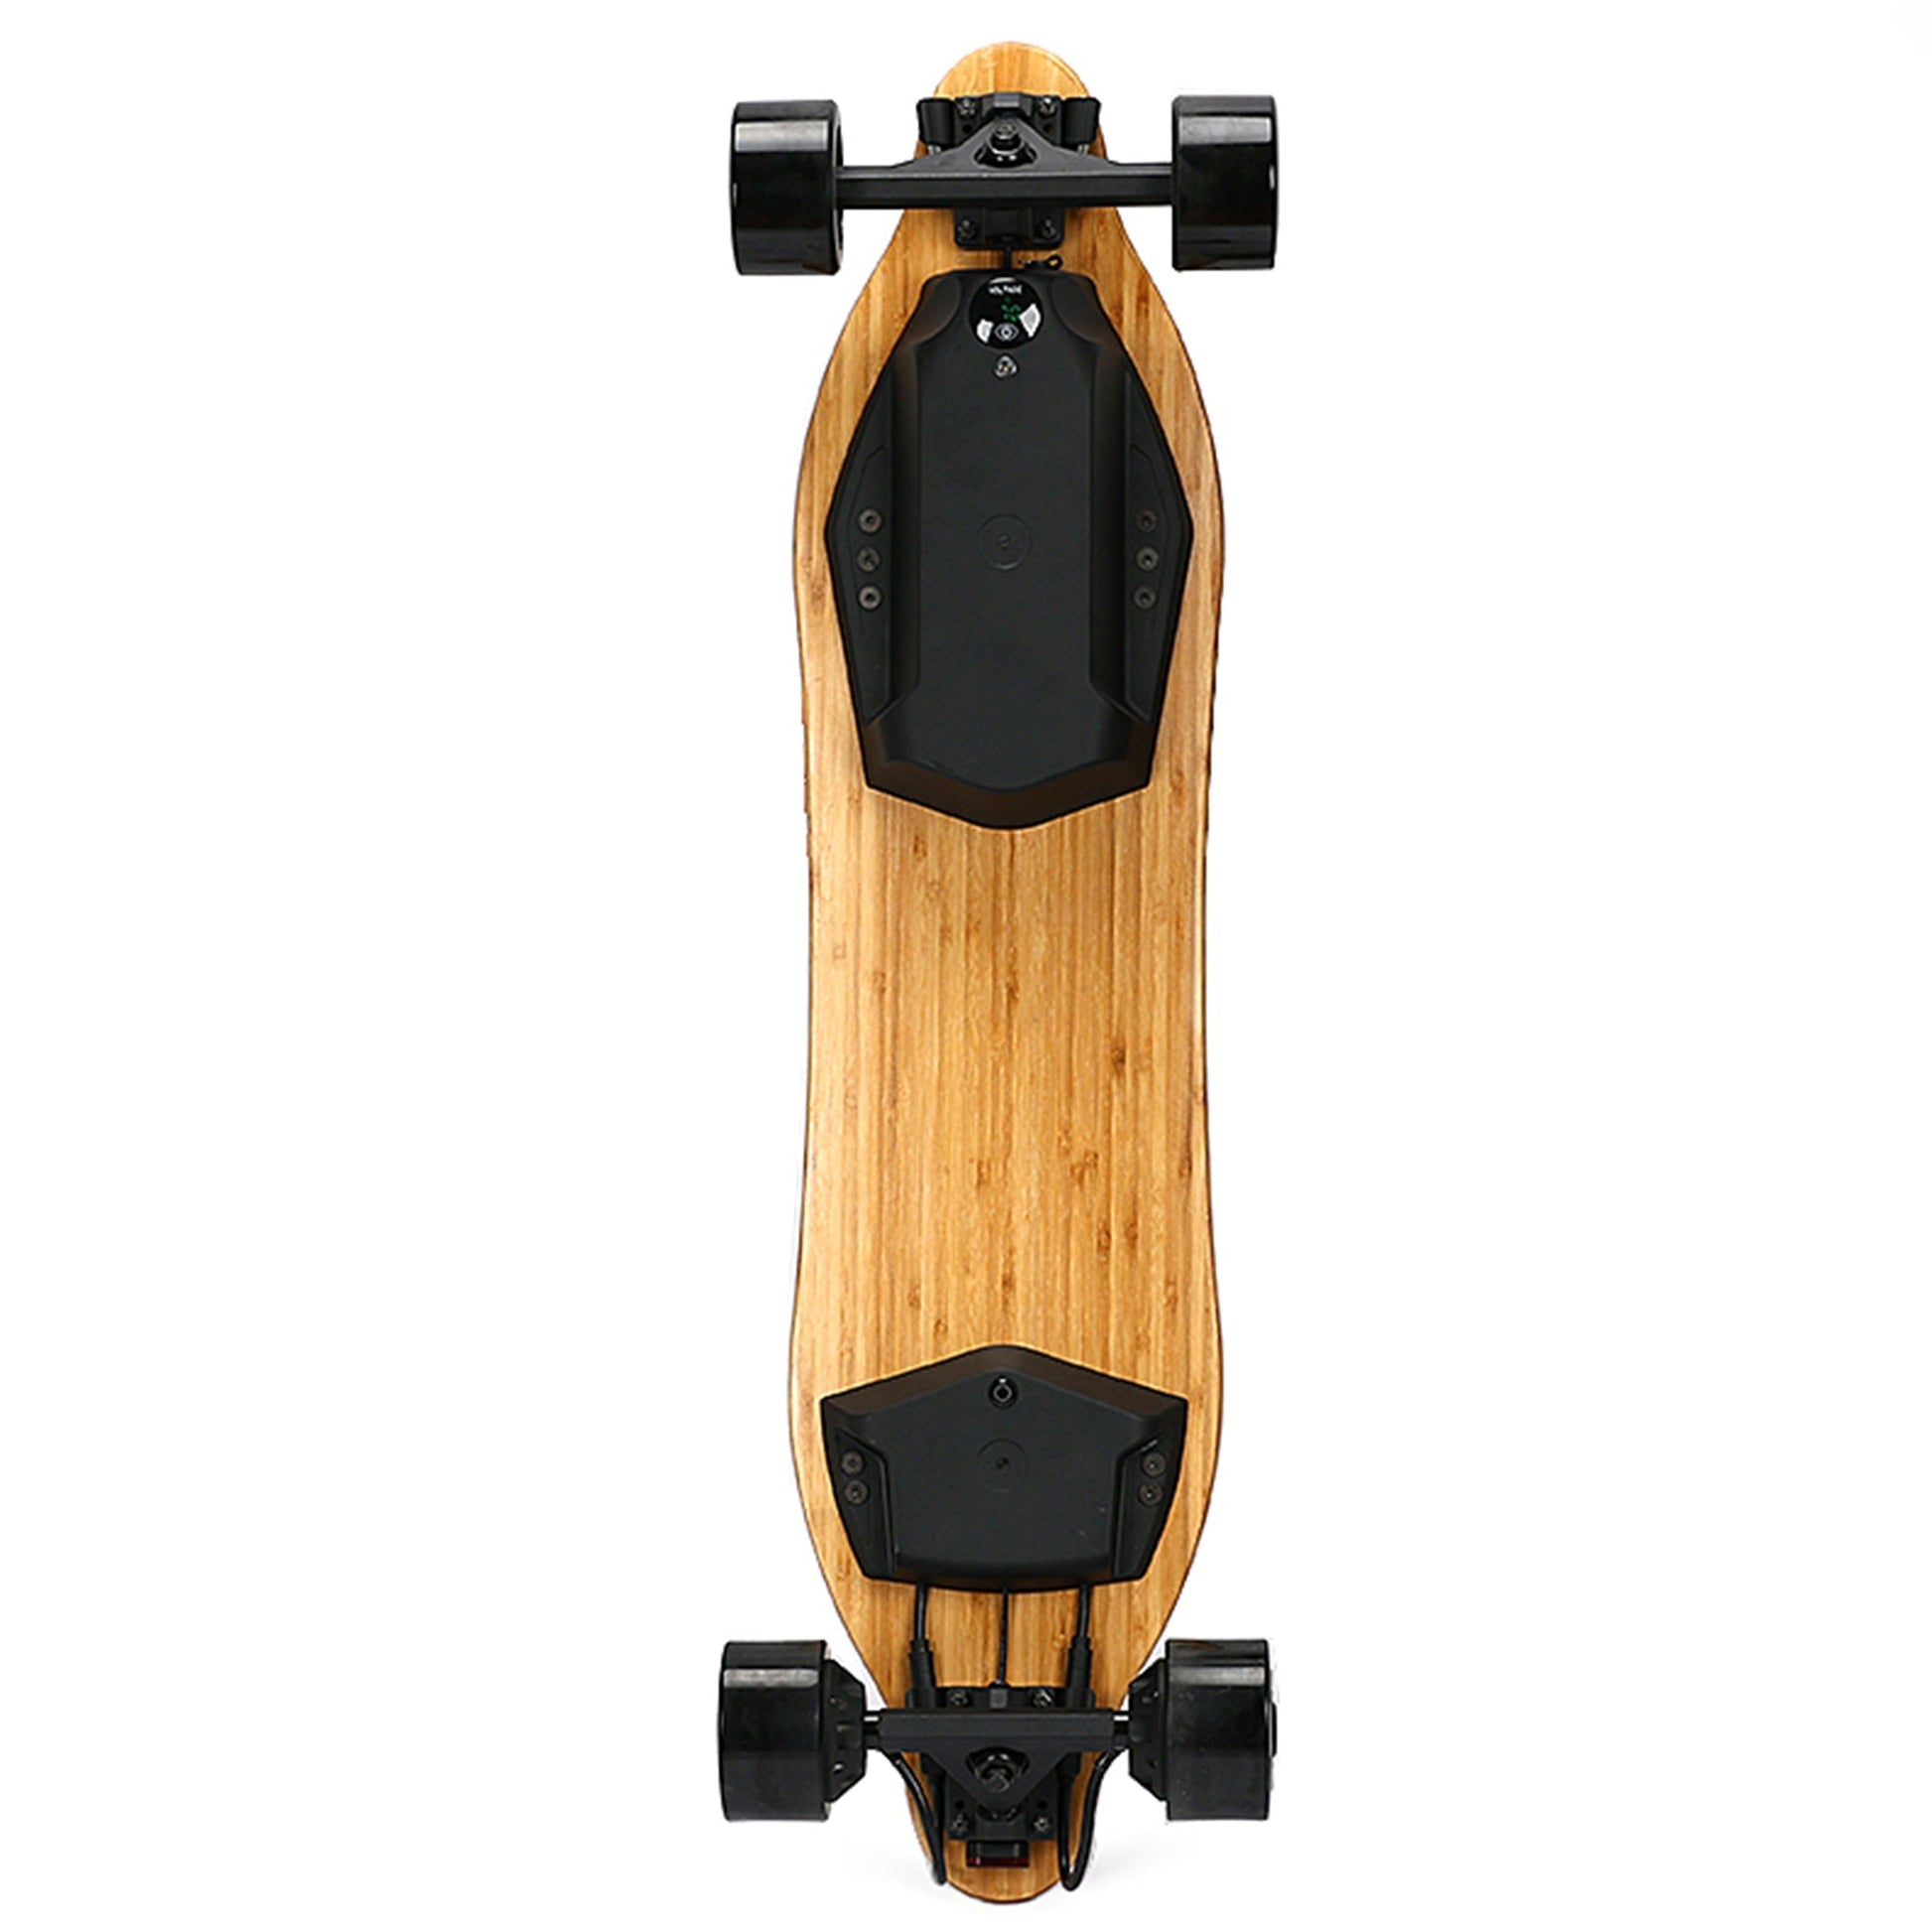 Motors electric skateboard learn to use in five minutes daily transportation electric longboard for adults